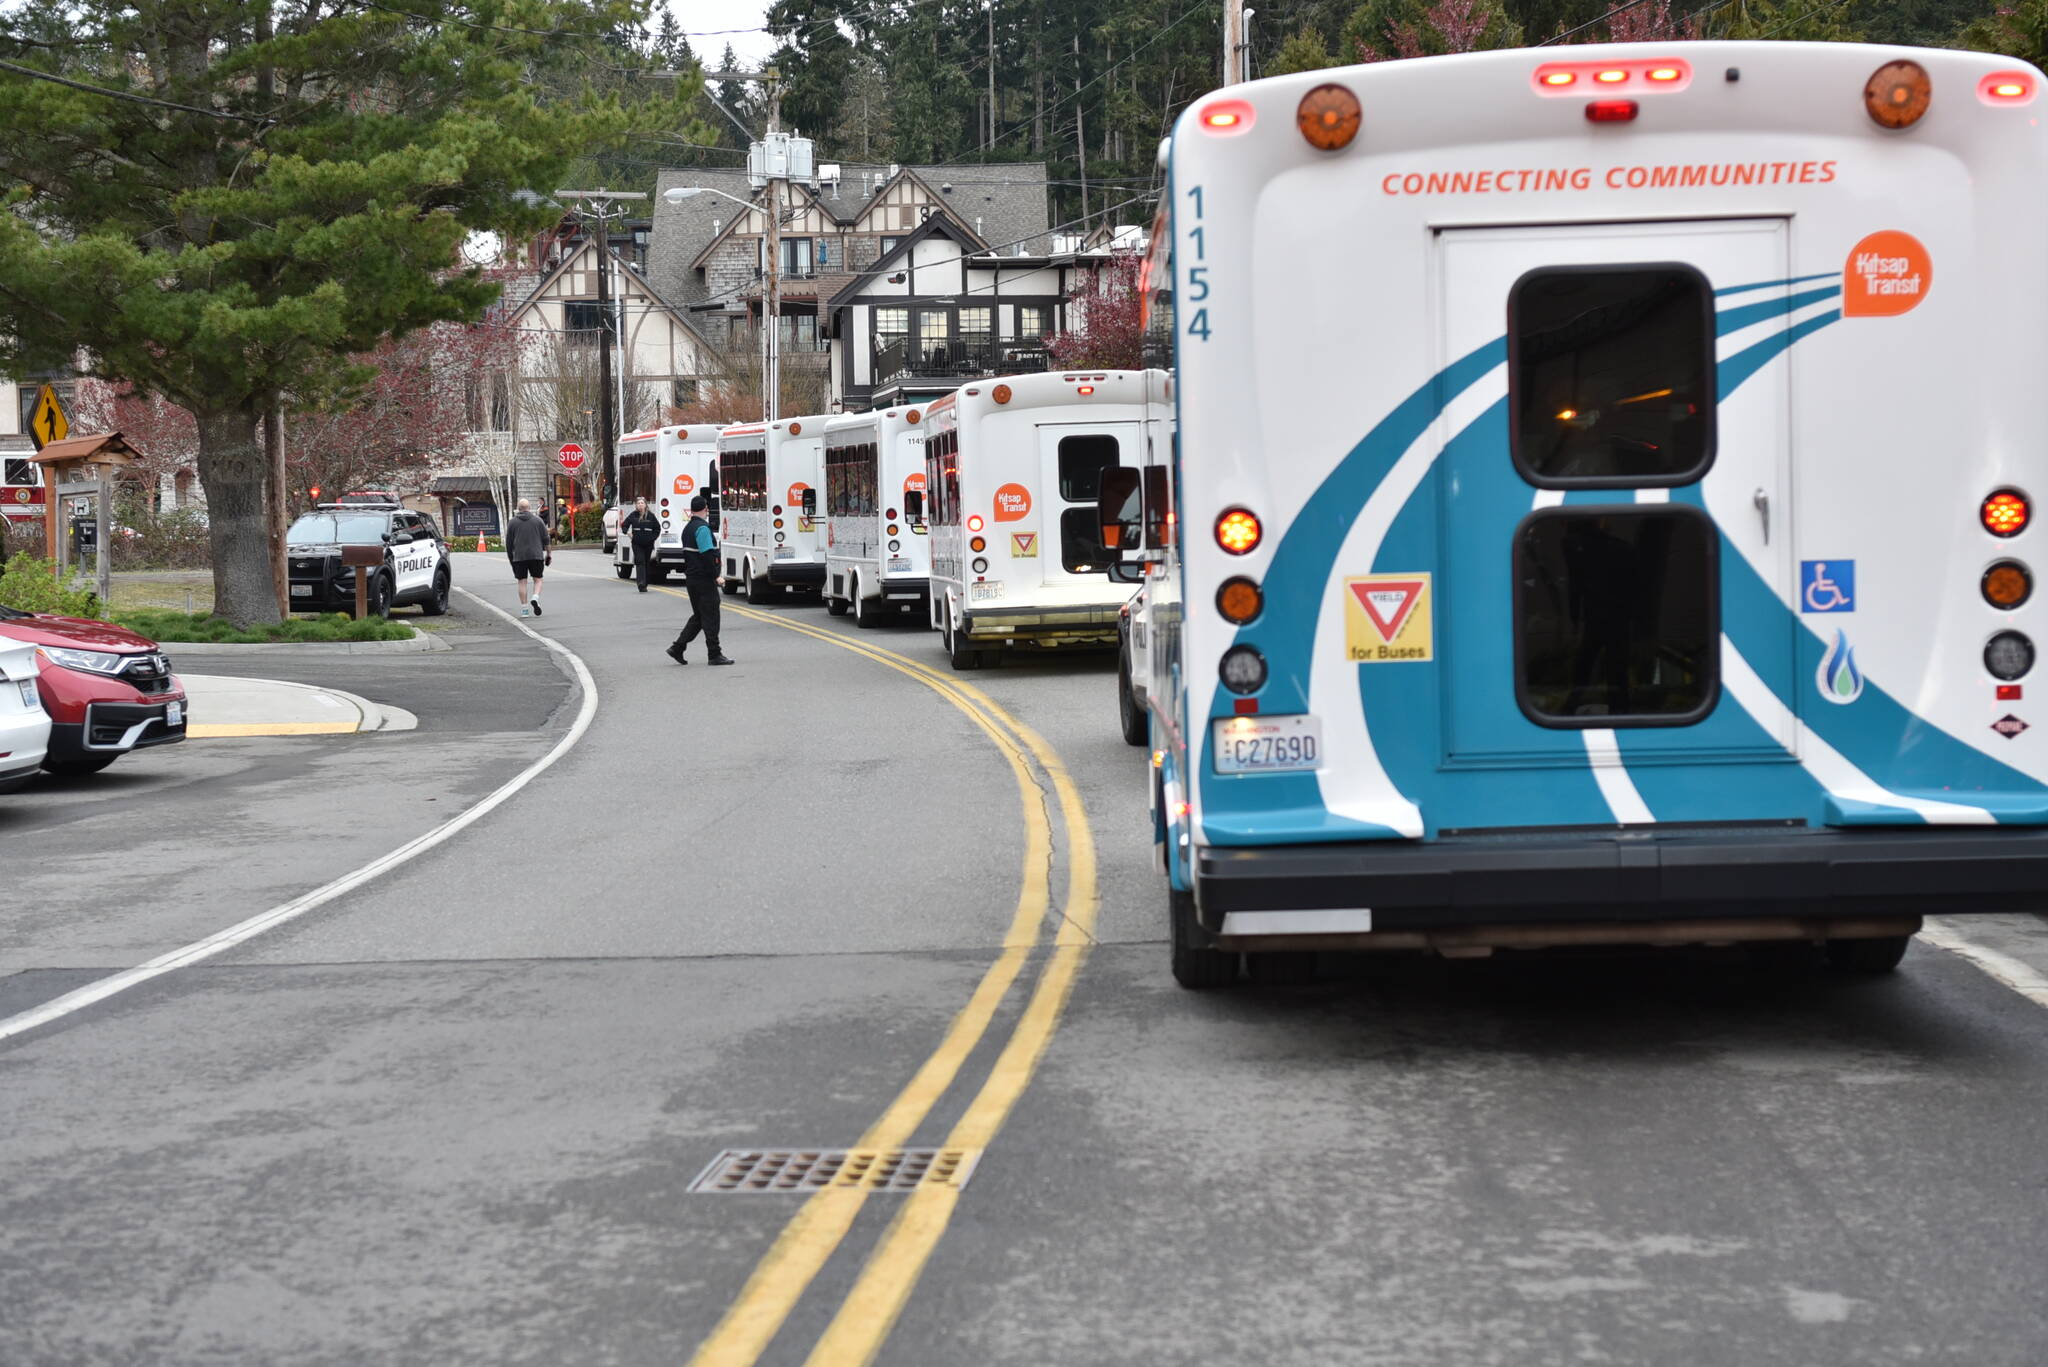 Kitsap Transit shuttles lined up in Lynwood in anticipation of taking passengers to Bremerton.